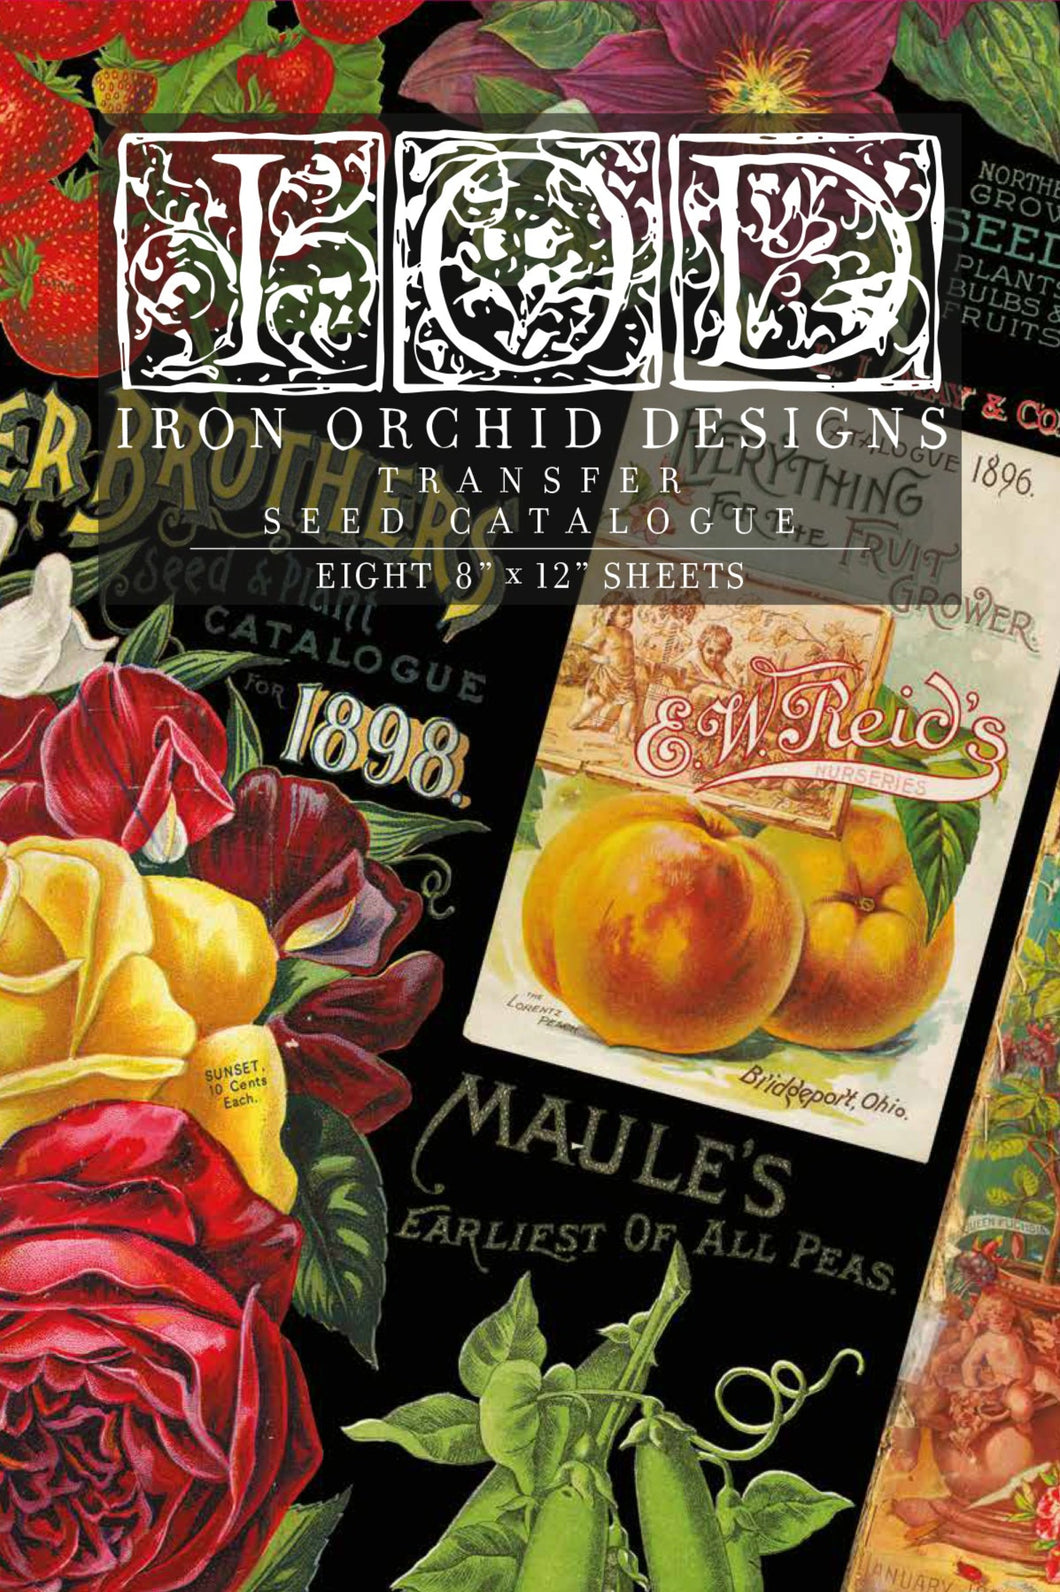 Seed Catalogue Transfer by IOD, Iron Orchid Designs